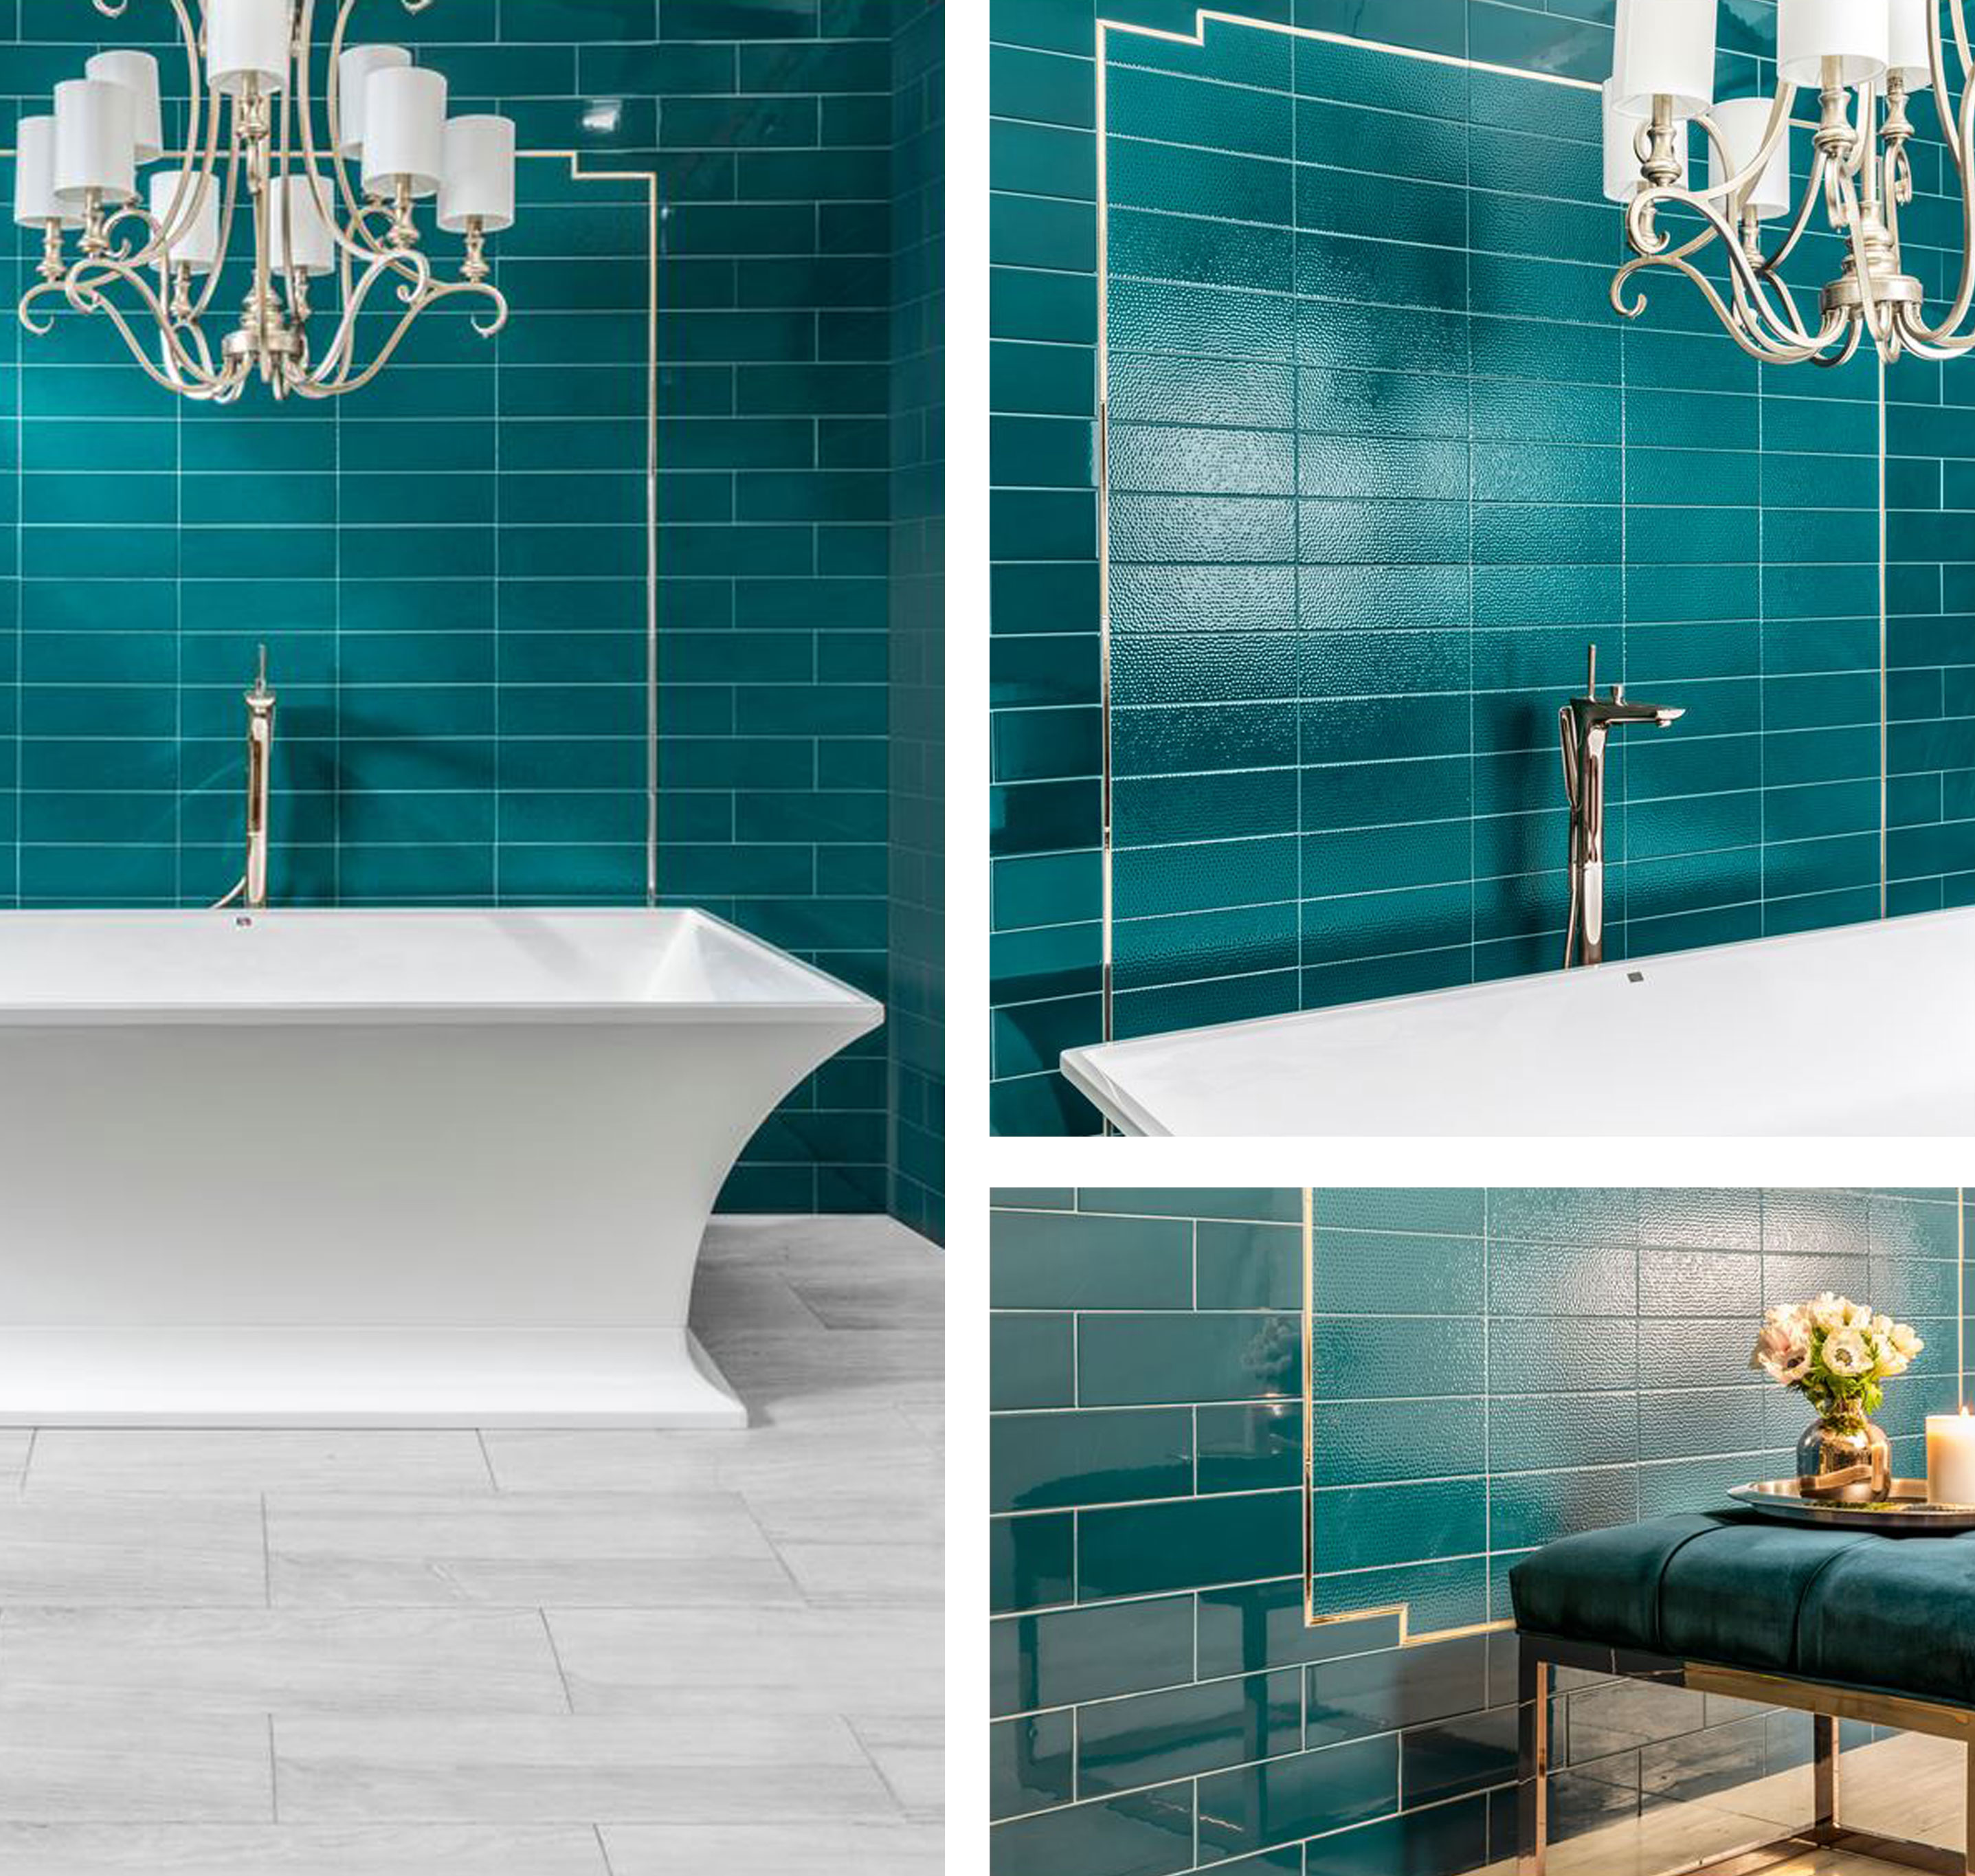 3 ways to incorporate aqua tiles into your home